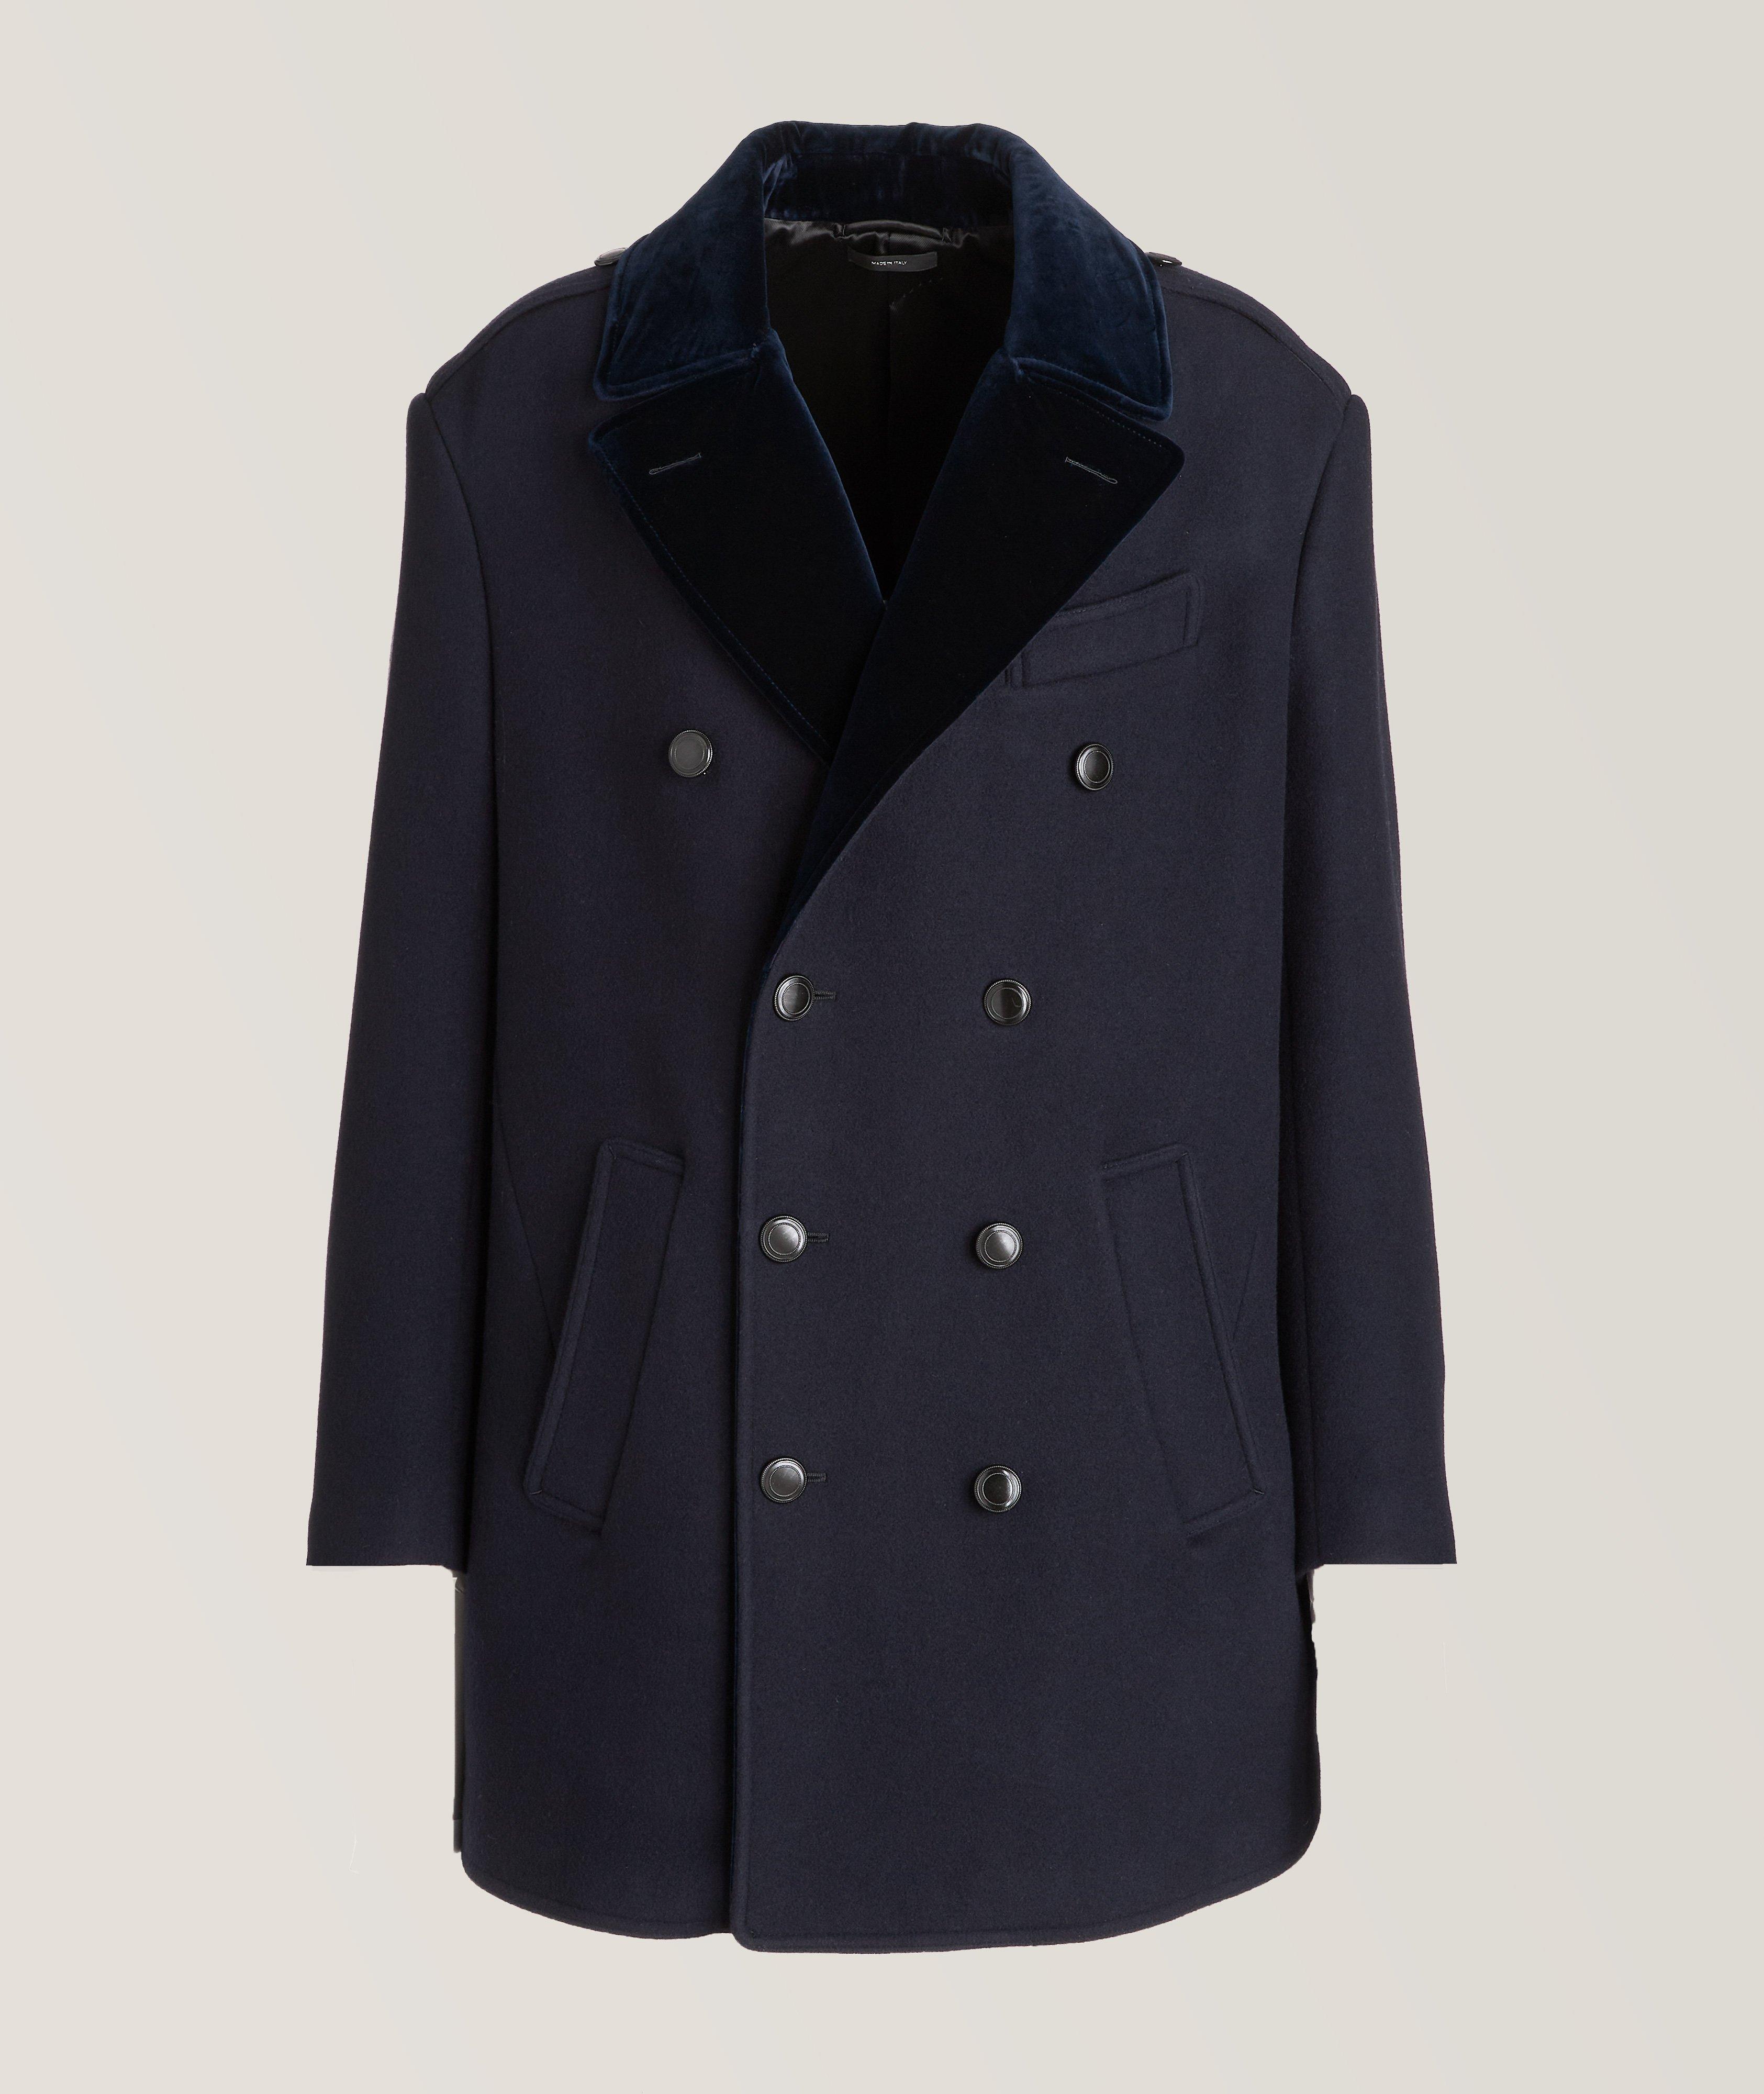 TOM FORD Officer Wool Peacoat